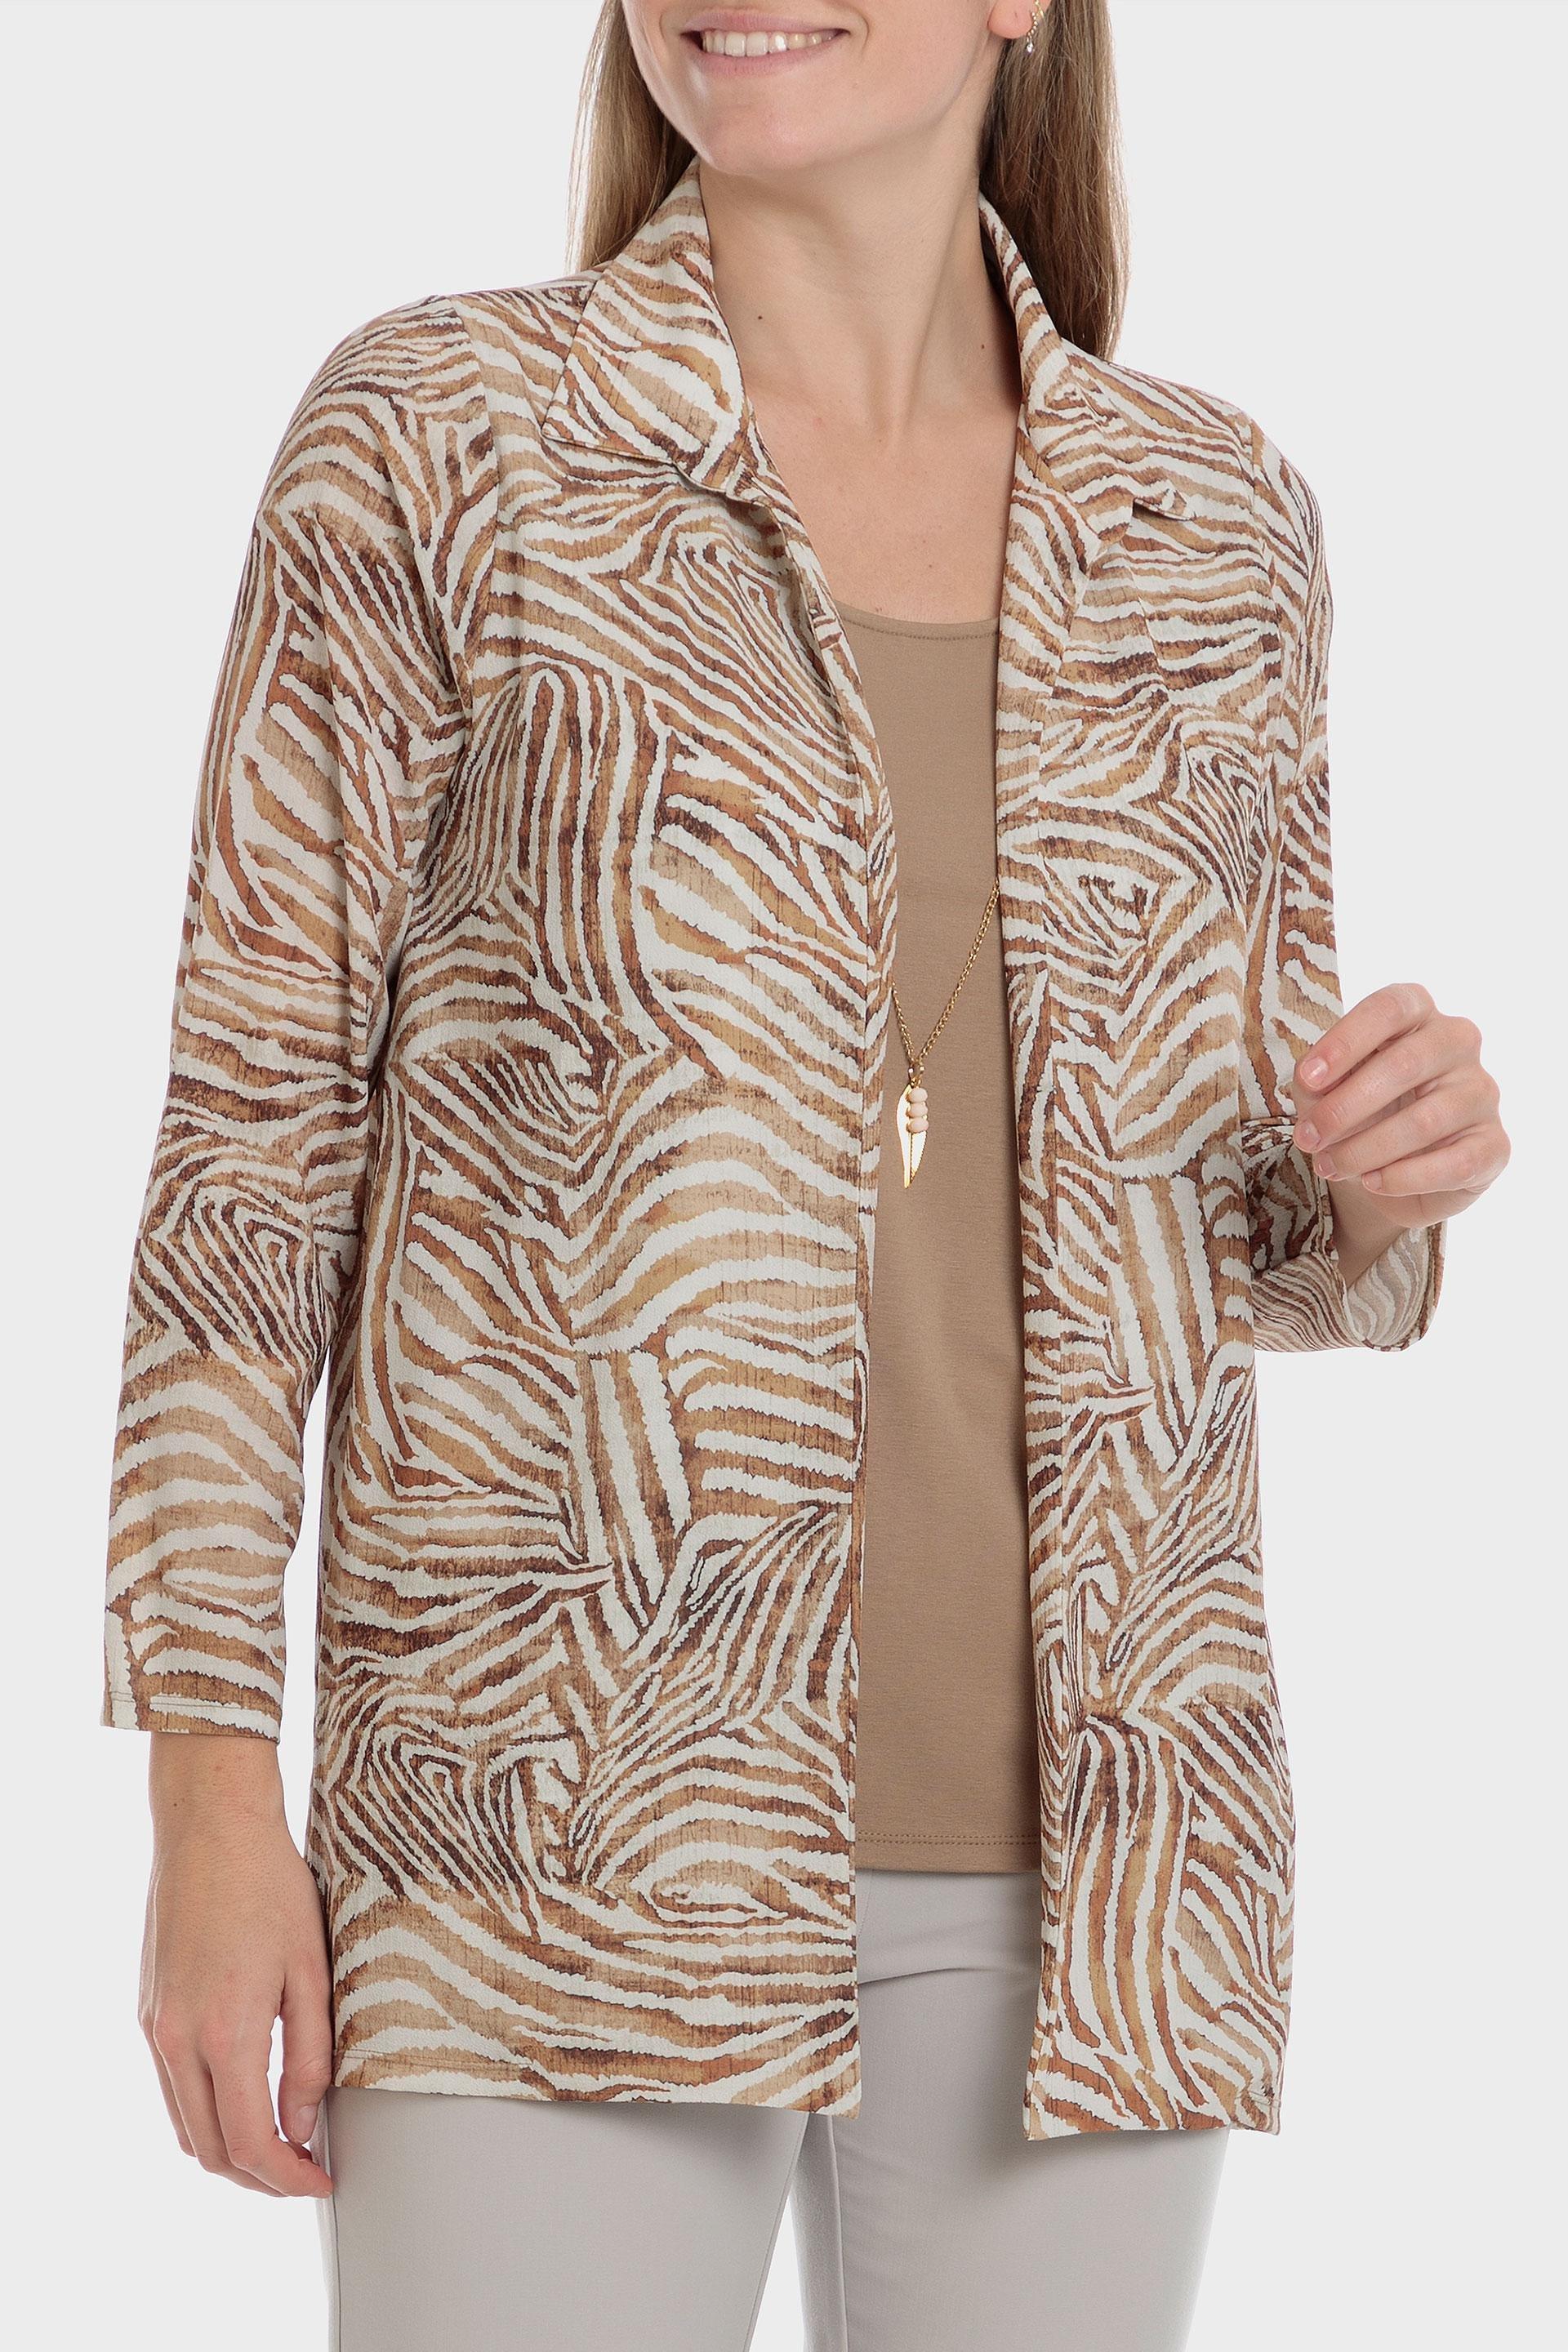 Punt Roma - Beige Faux Printed Twinset